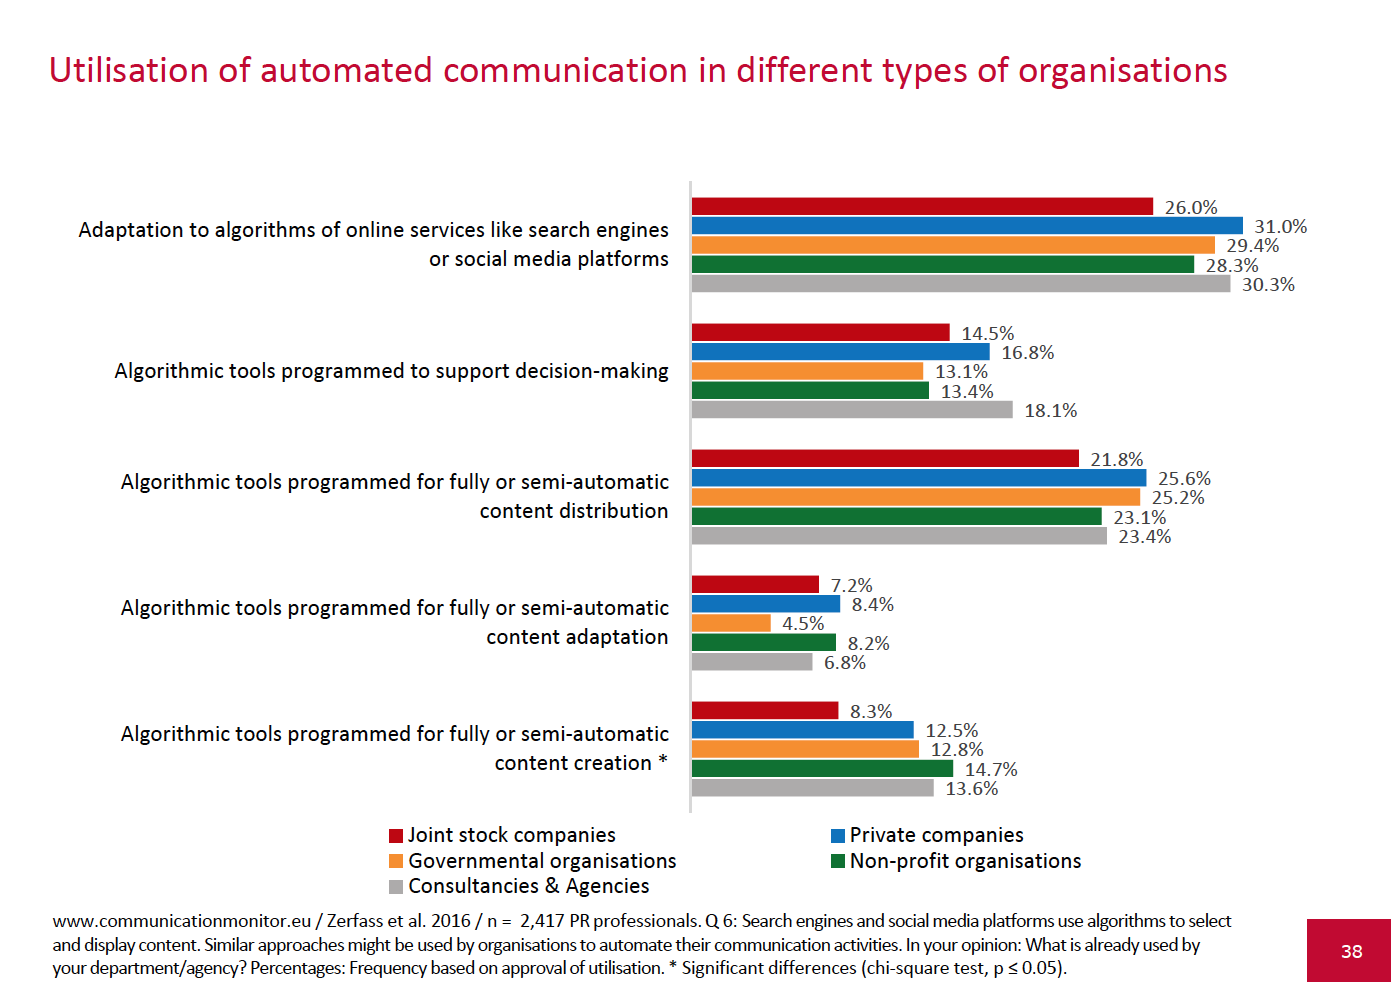 European-Communication-Monitor-2016-Corporate-Communications-PR-Agency-Utilisation-of-automated-communication-in-different-types-of-organisations